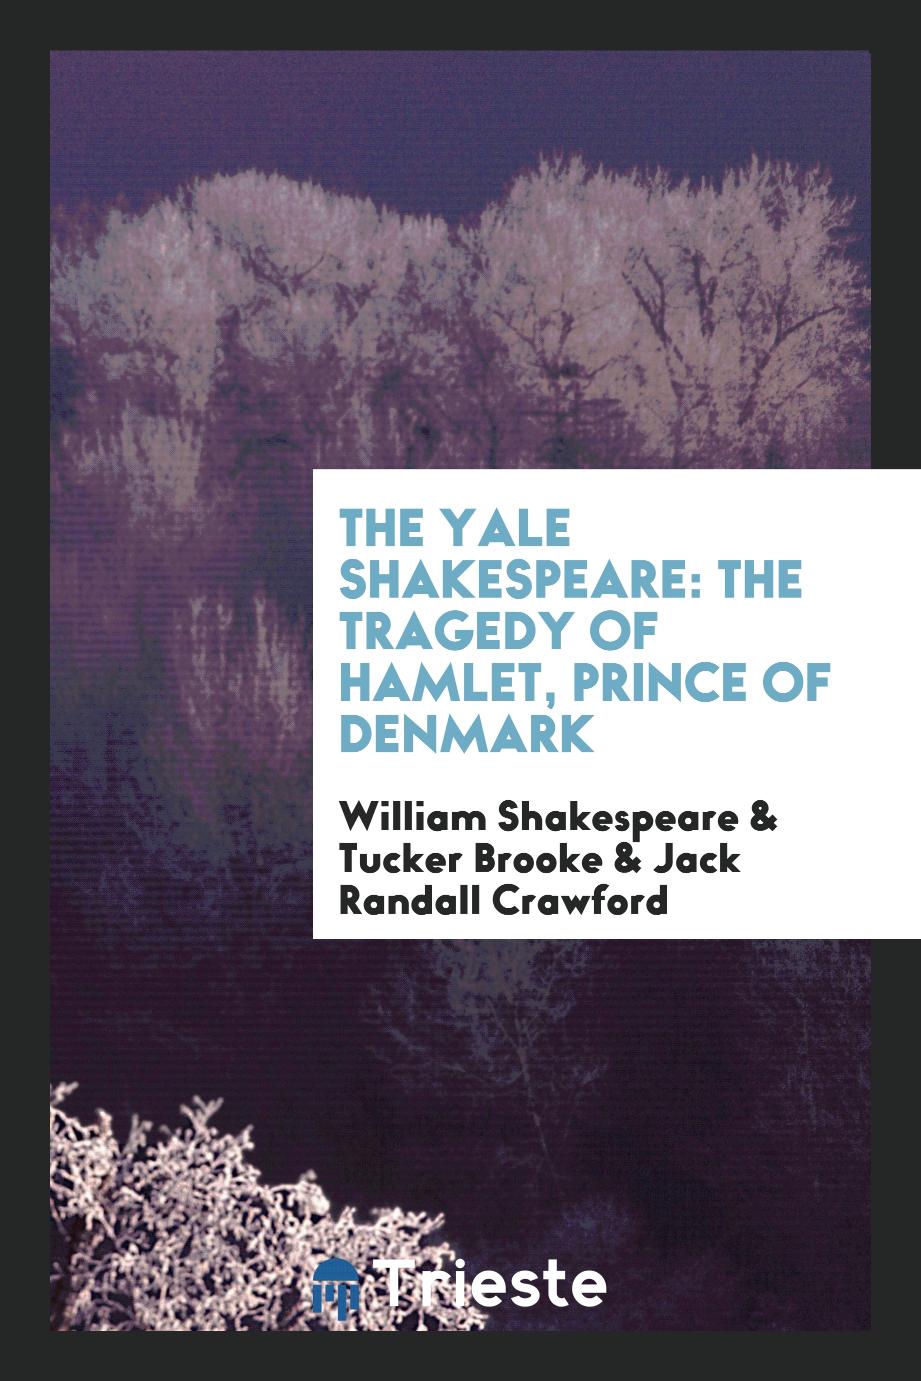 The Yale Shakespeare: The Tragedy of Hamlet, Prince of Denmark